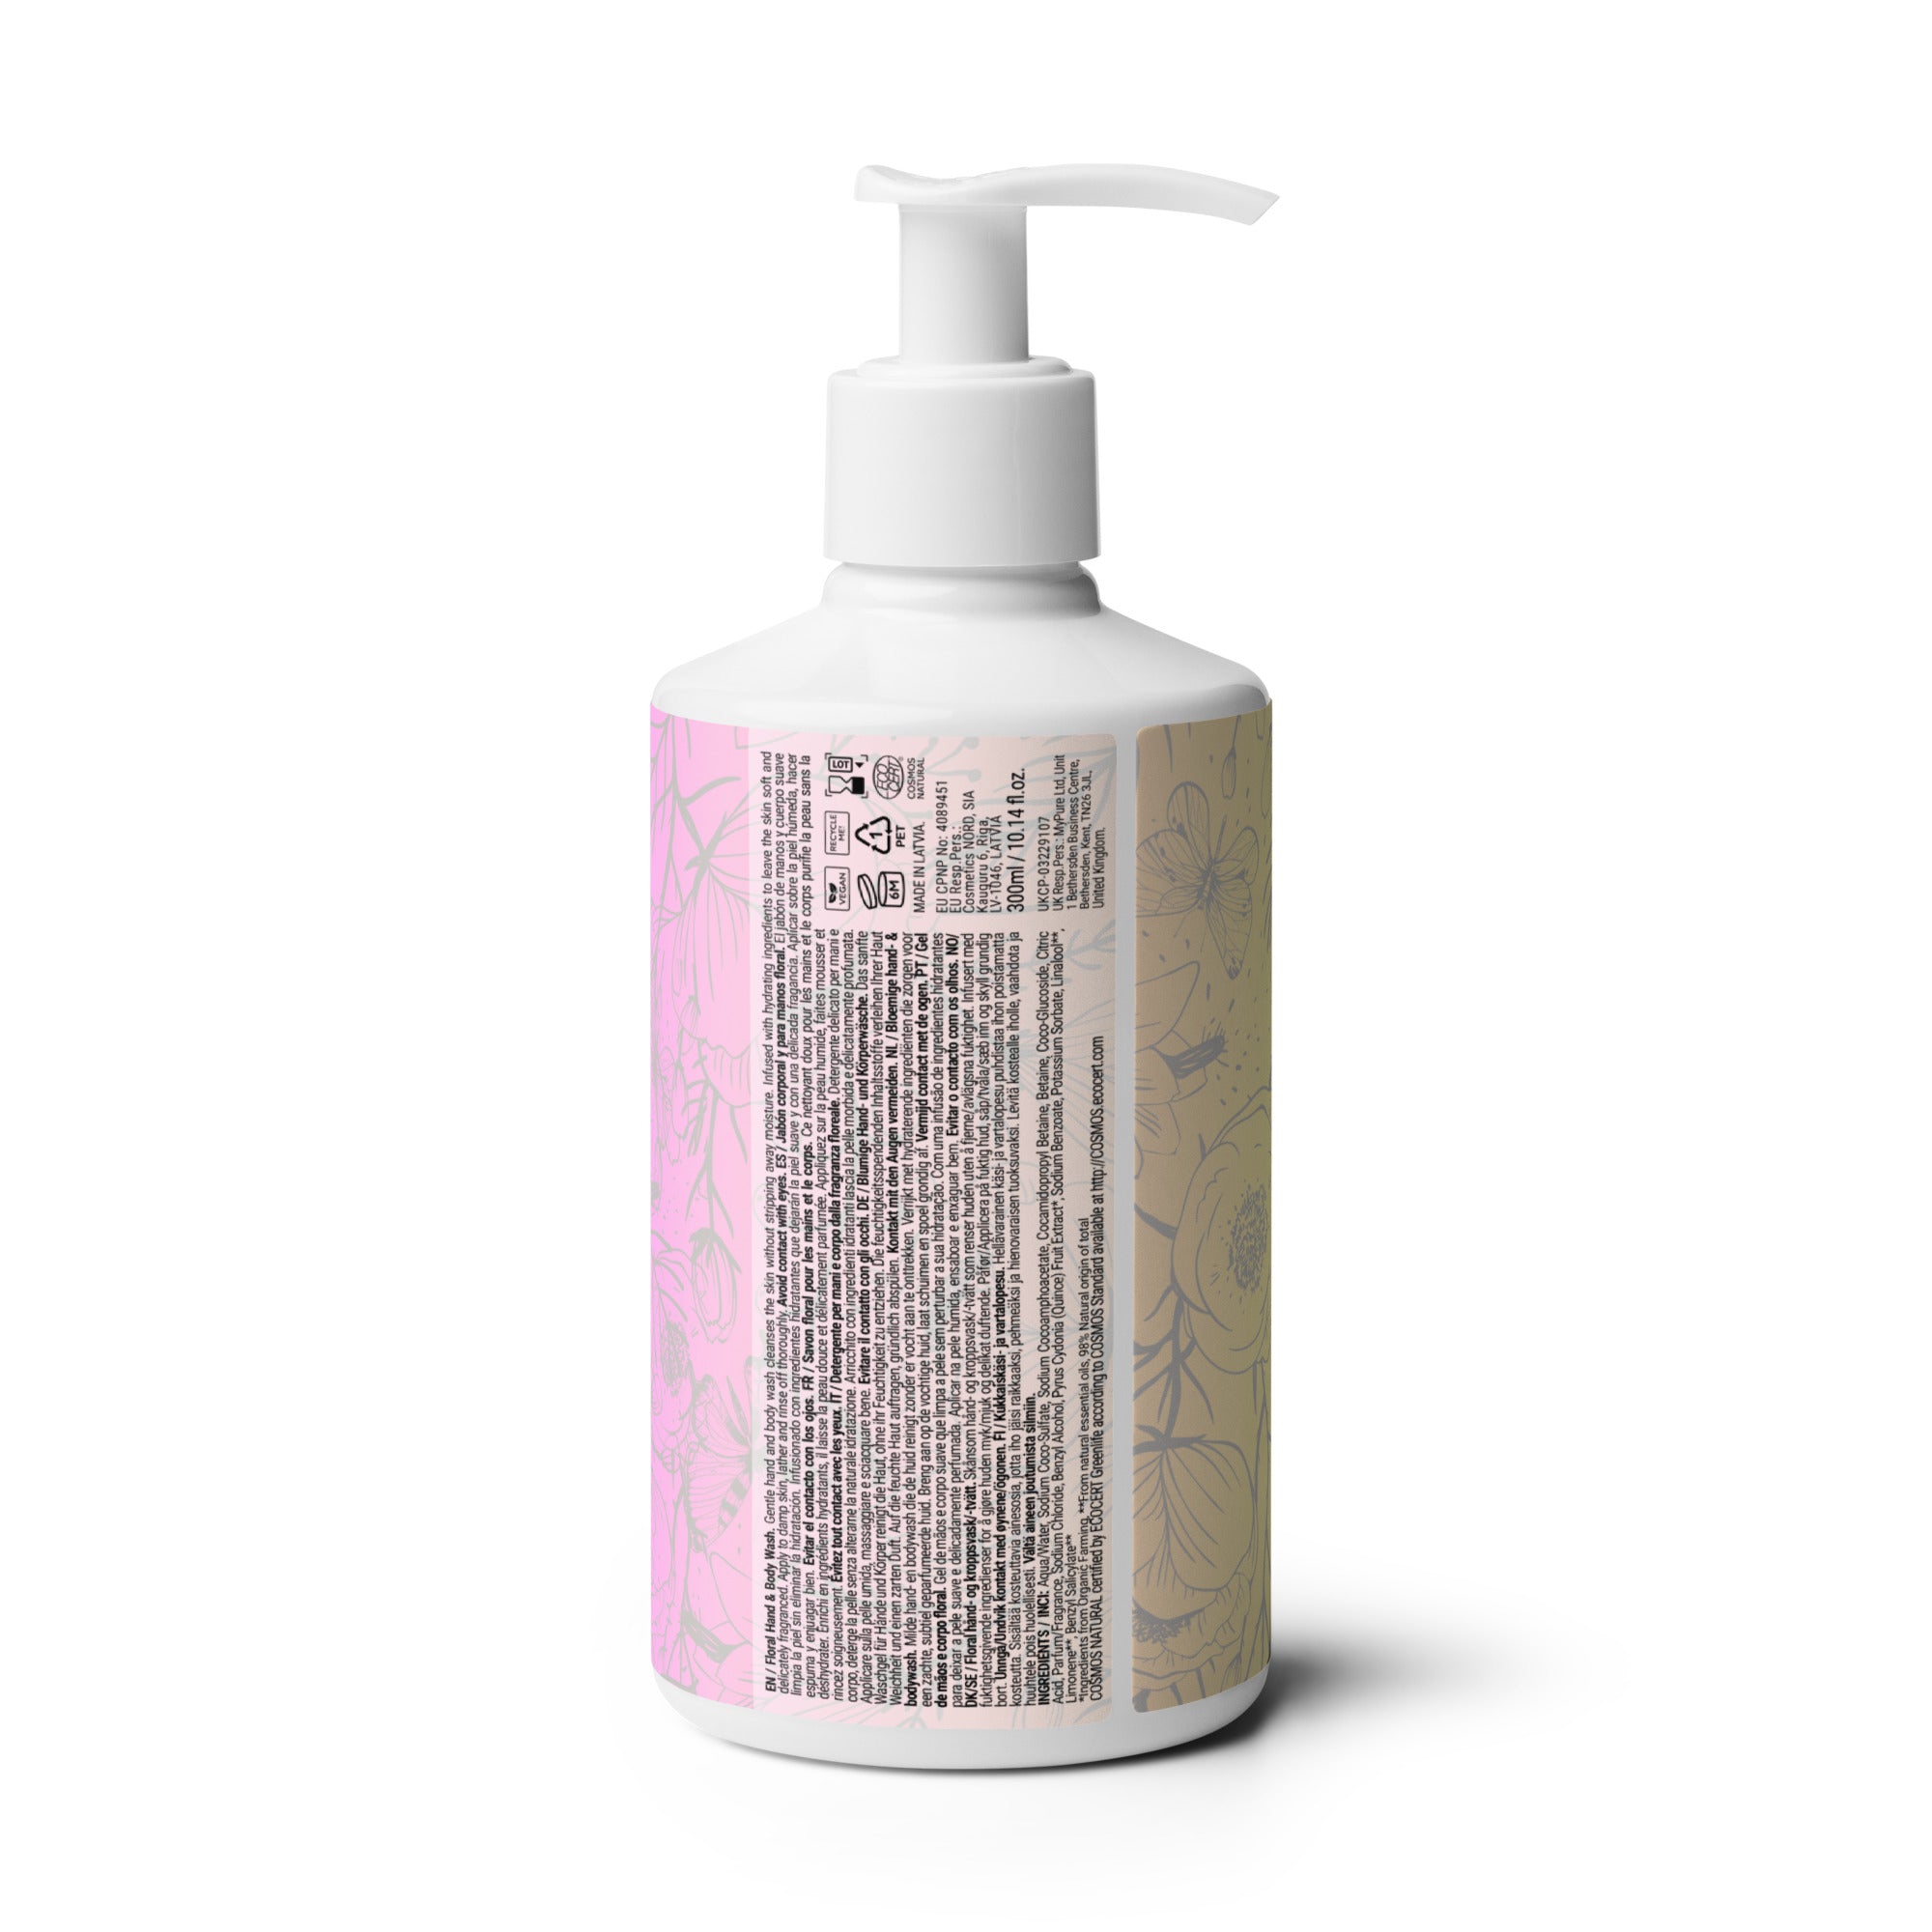 Anacotte Floral Fusion Hand & Body Wash